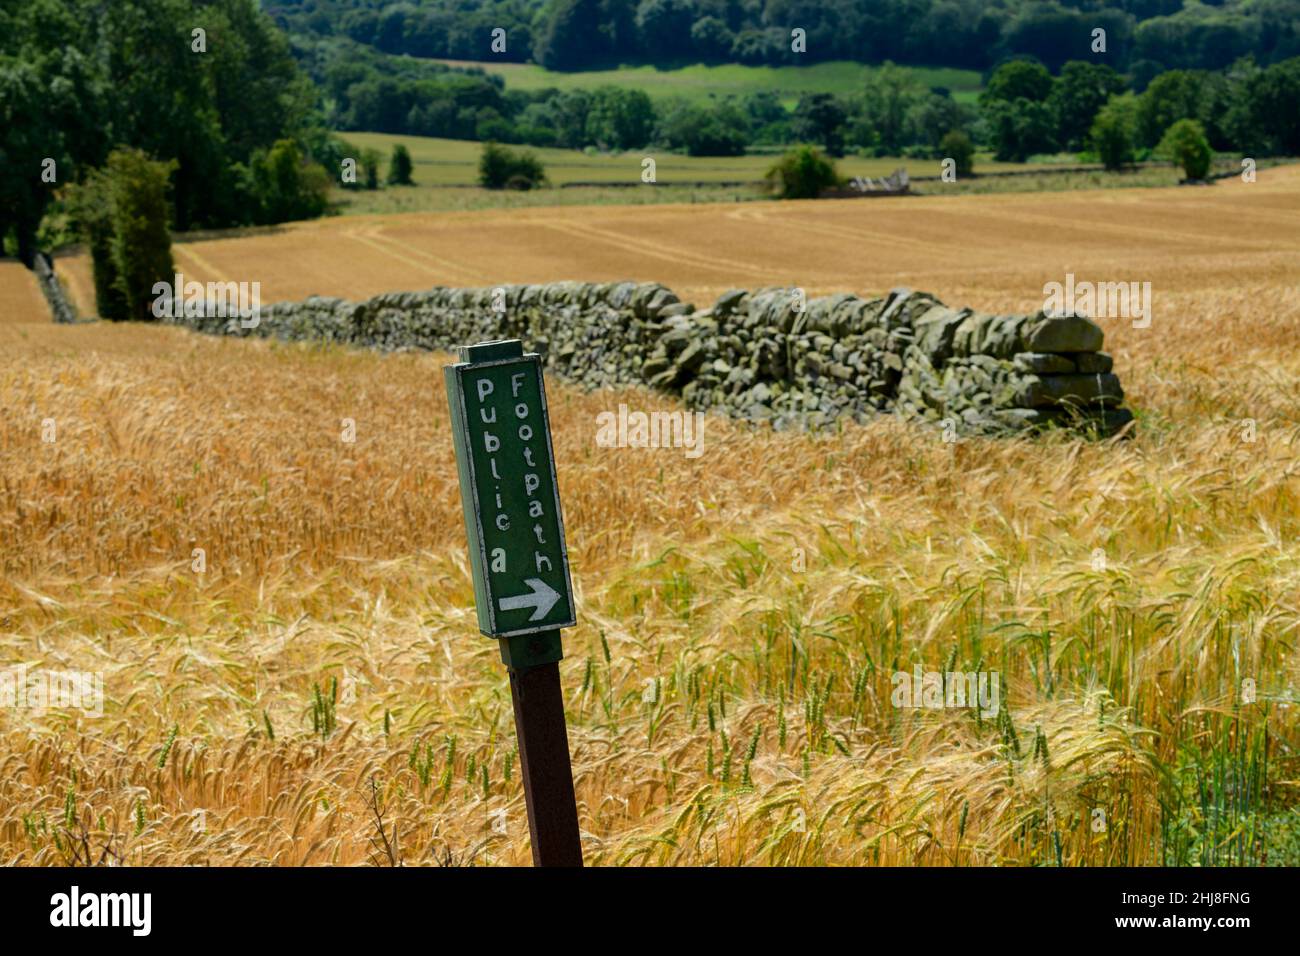 Footpath sign in scenic farm field of ripening golden awned barley (arable farmland cereal crop growing in countryside) - North Yorkshire, England UK. Stock Photo